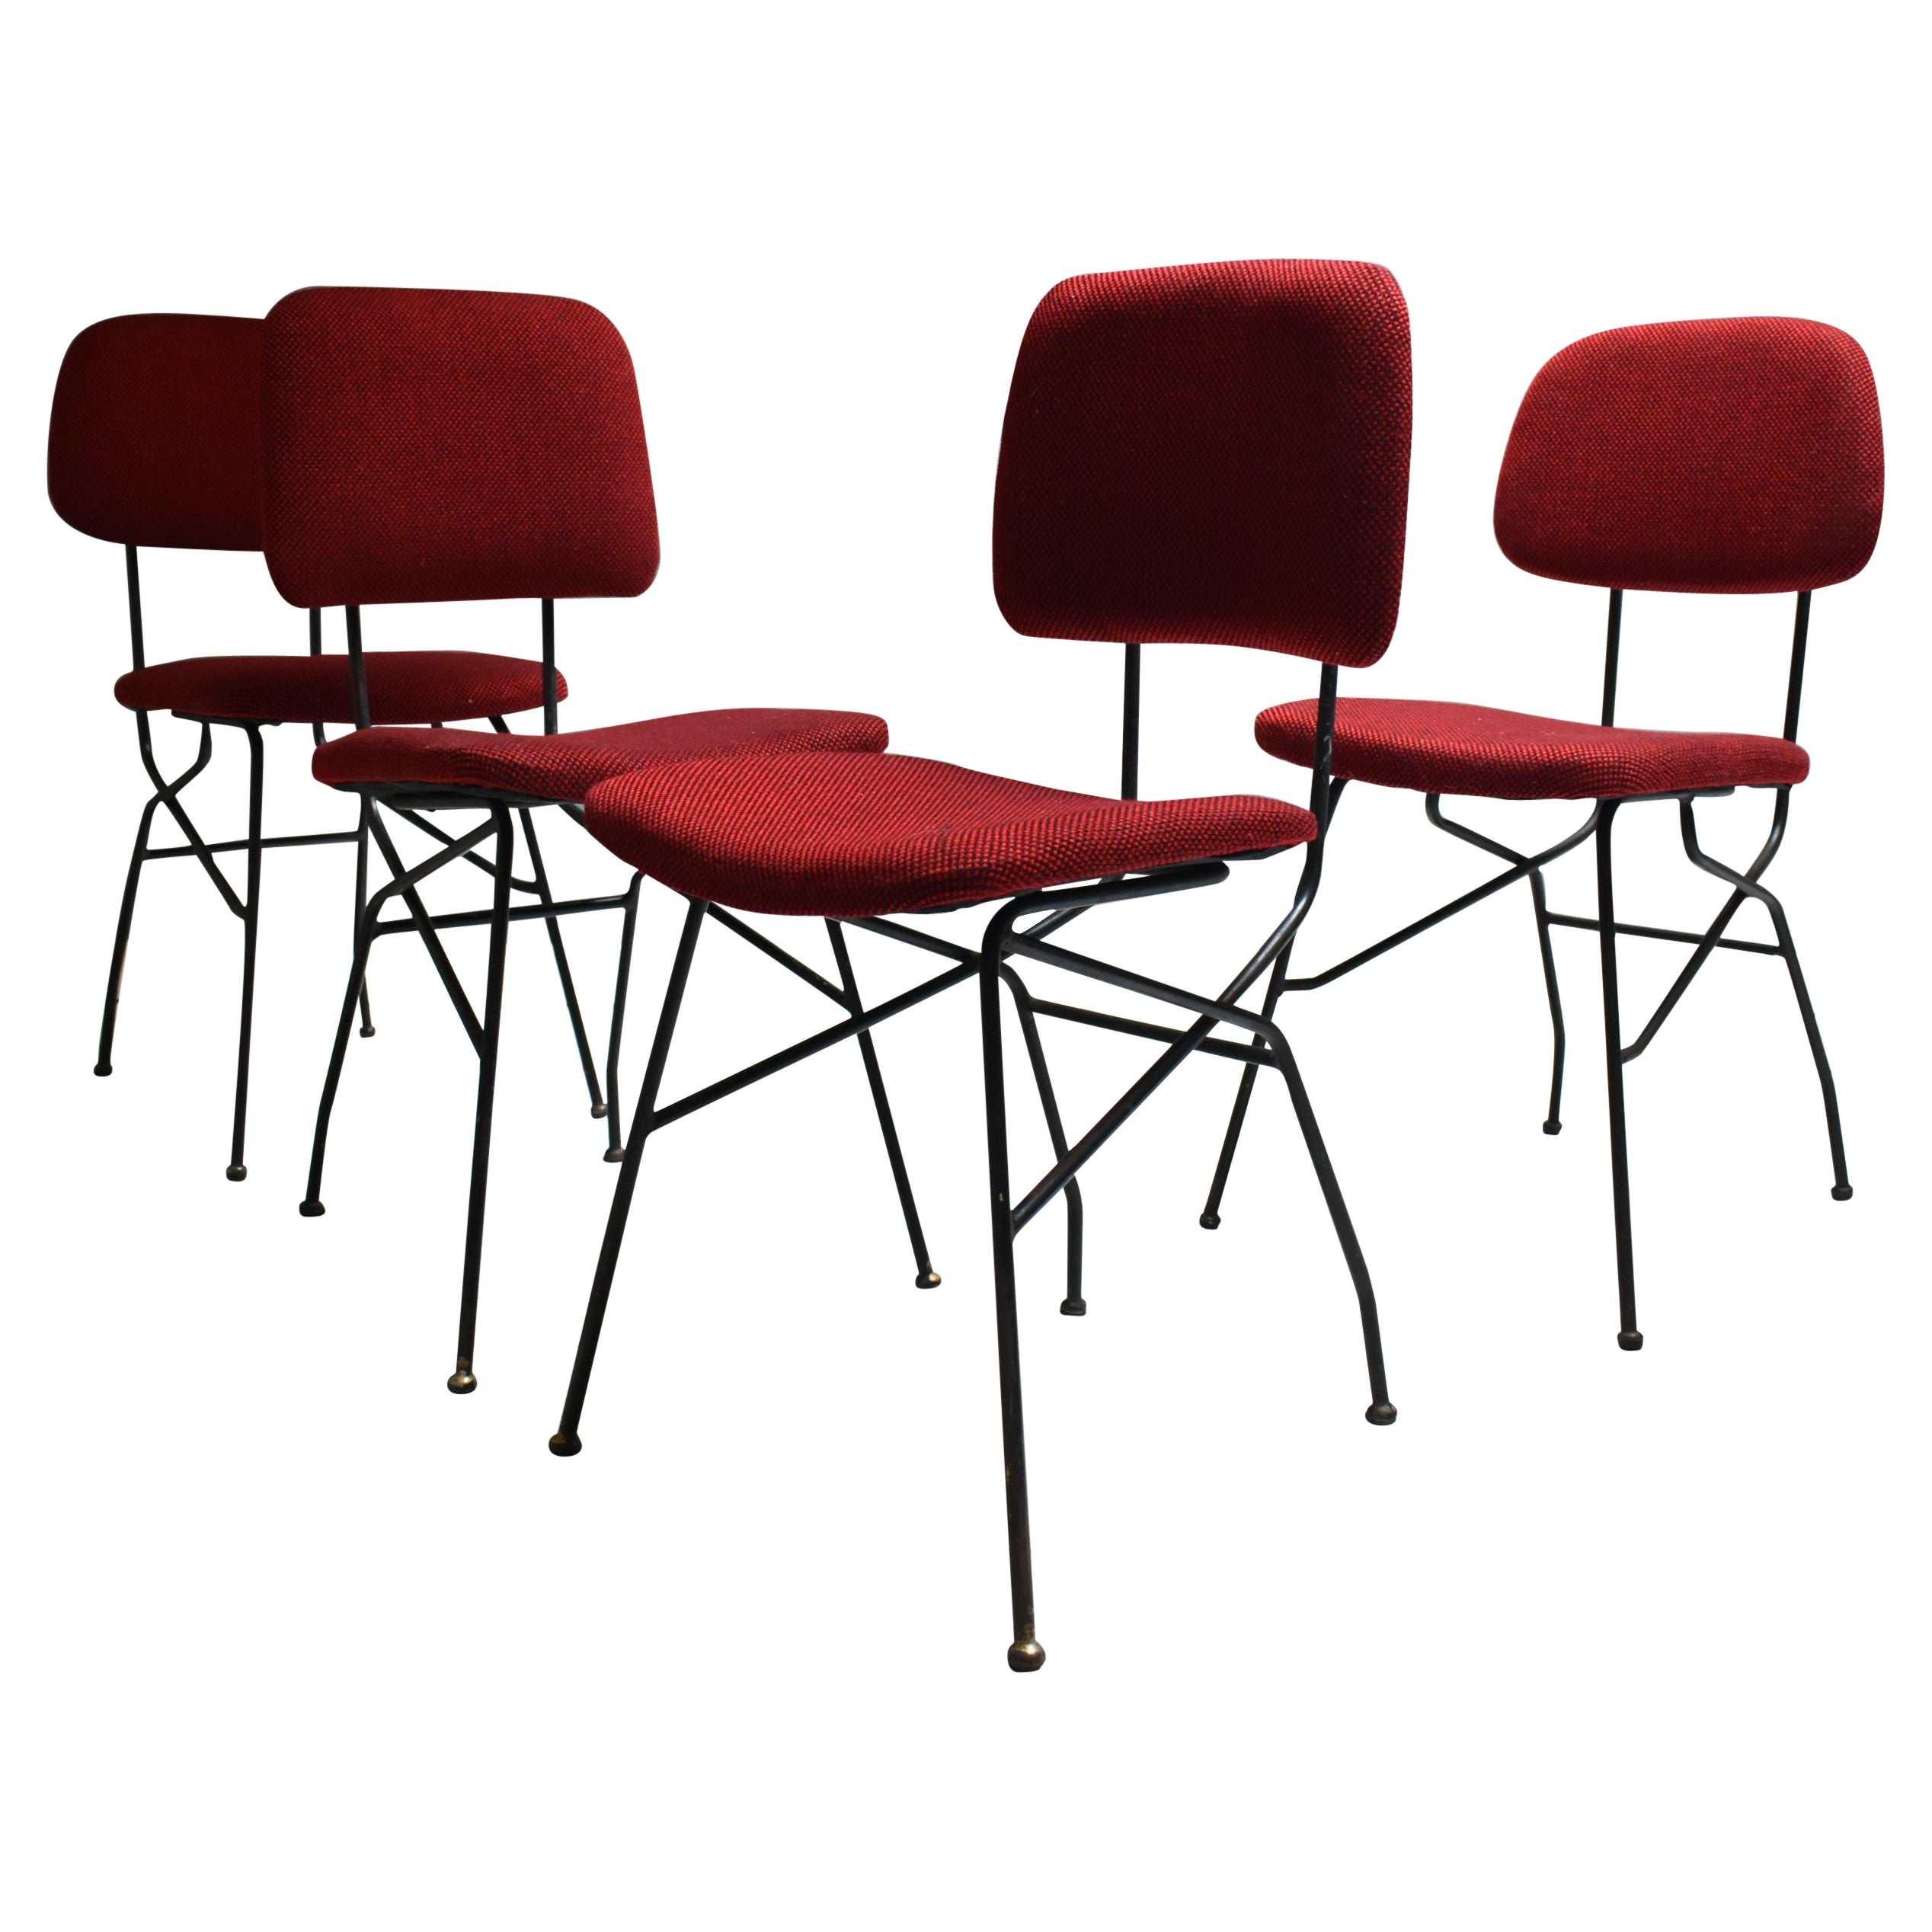 Set of 4 Vintage 60s Chairs, Italian Manufacture, Black Iron Structure For Sale